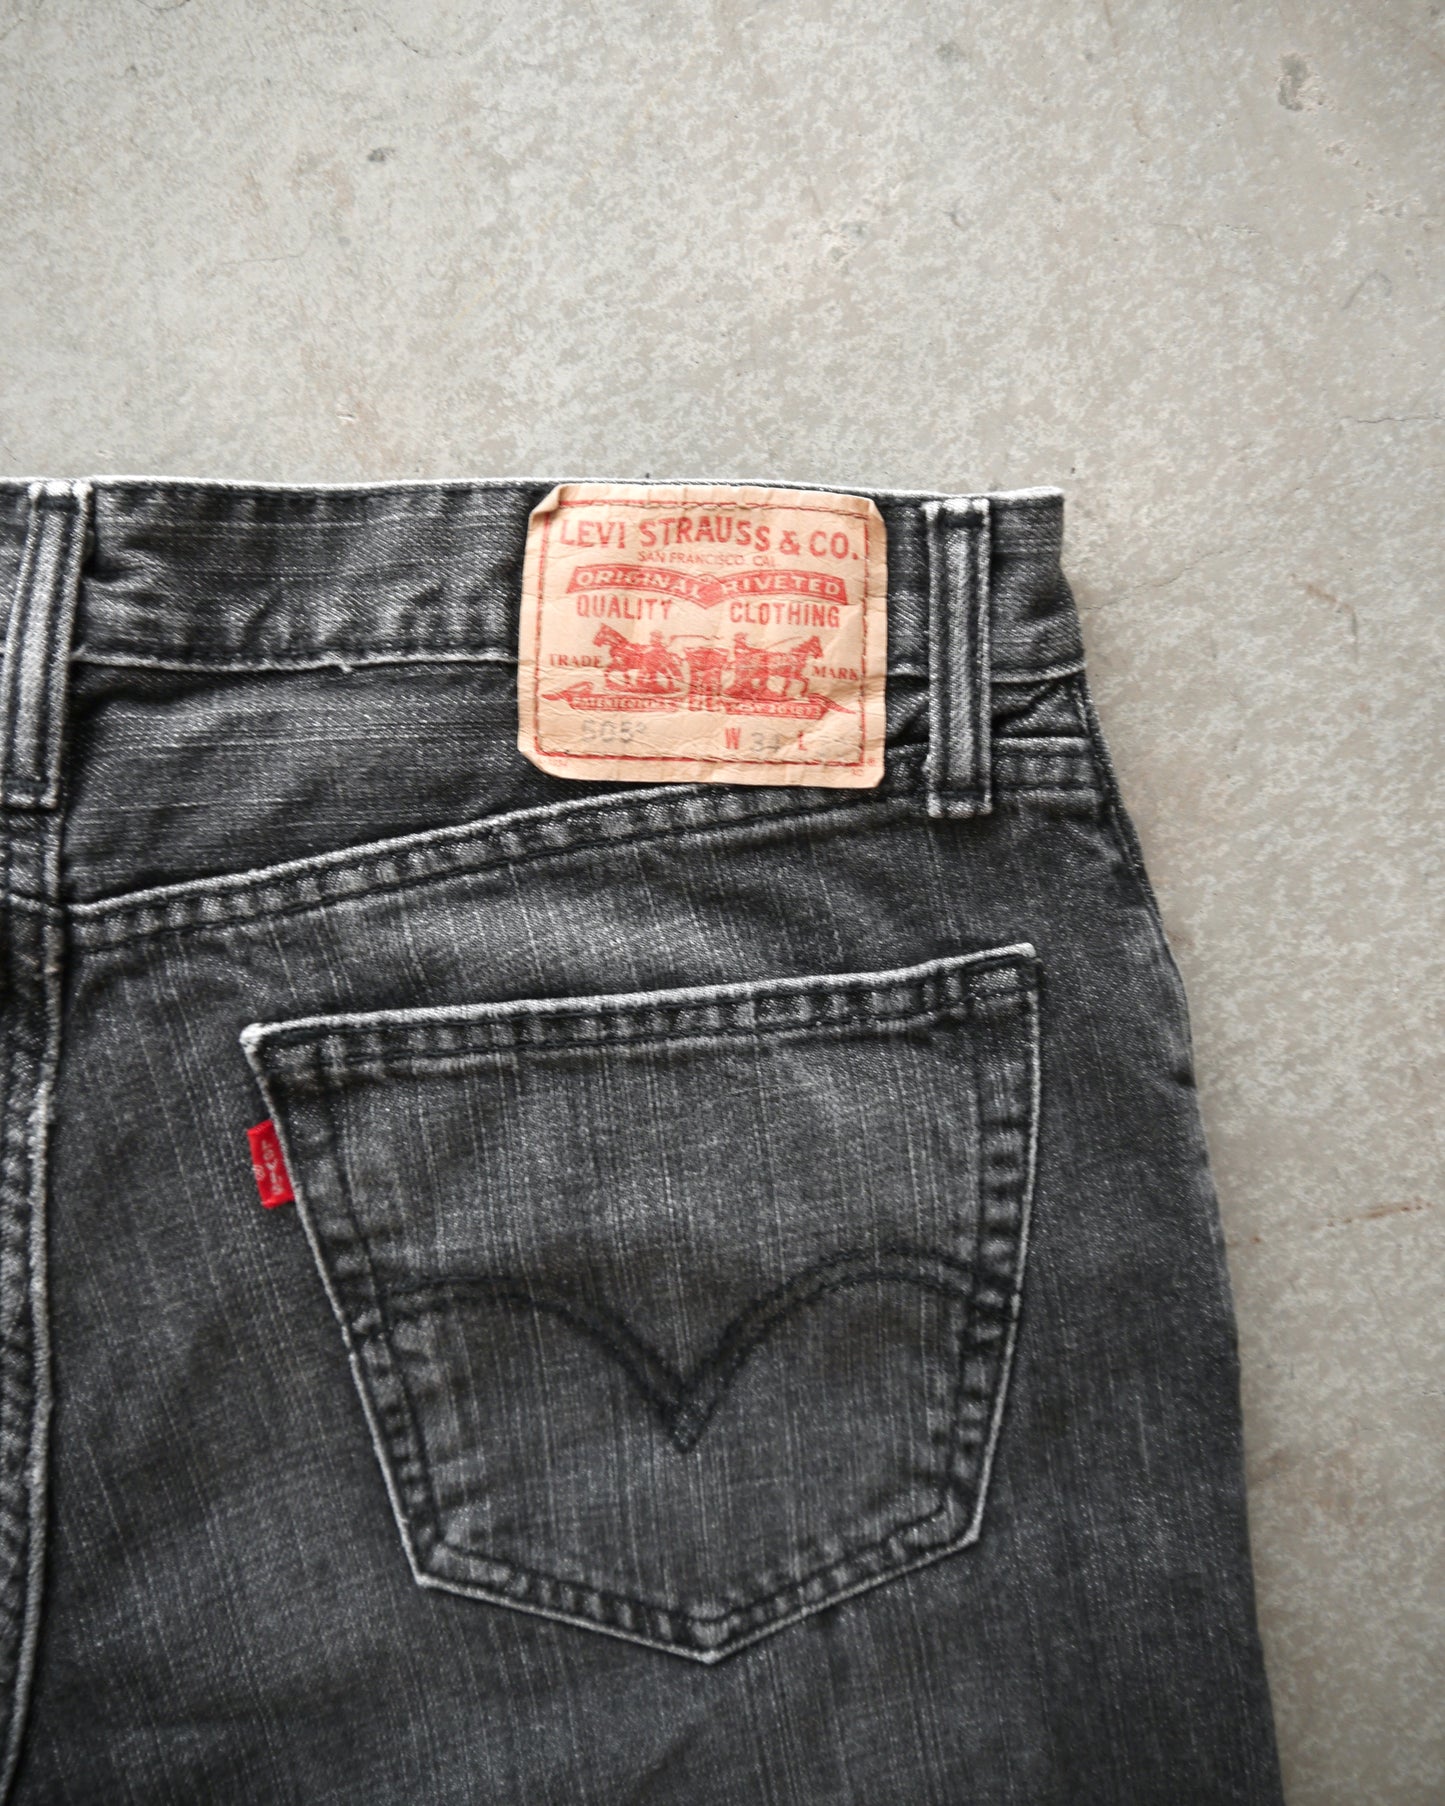 Early 2000s Levi’s 505 Faded Black Clawmark Jeans (34x31)